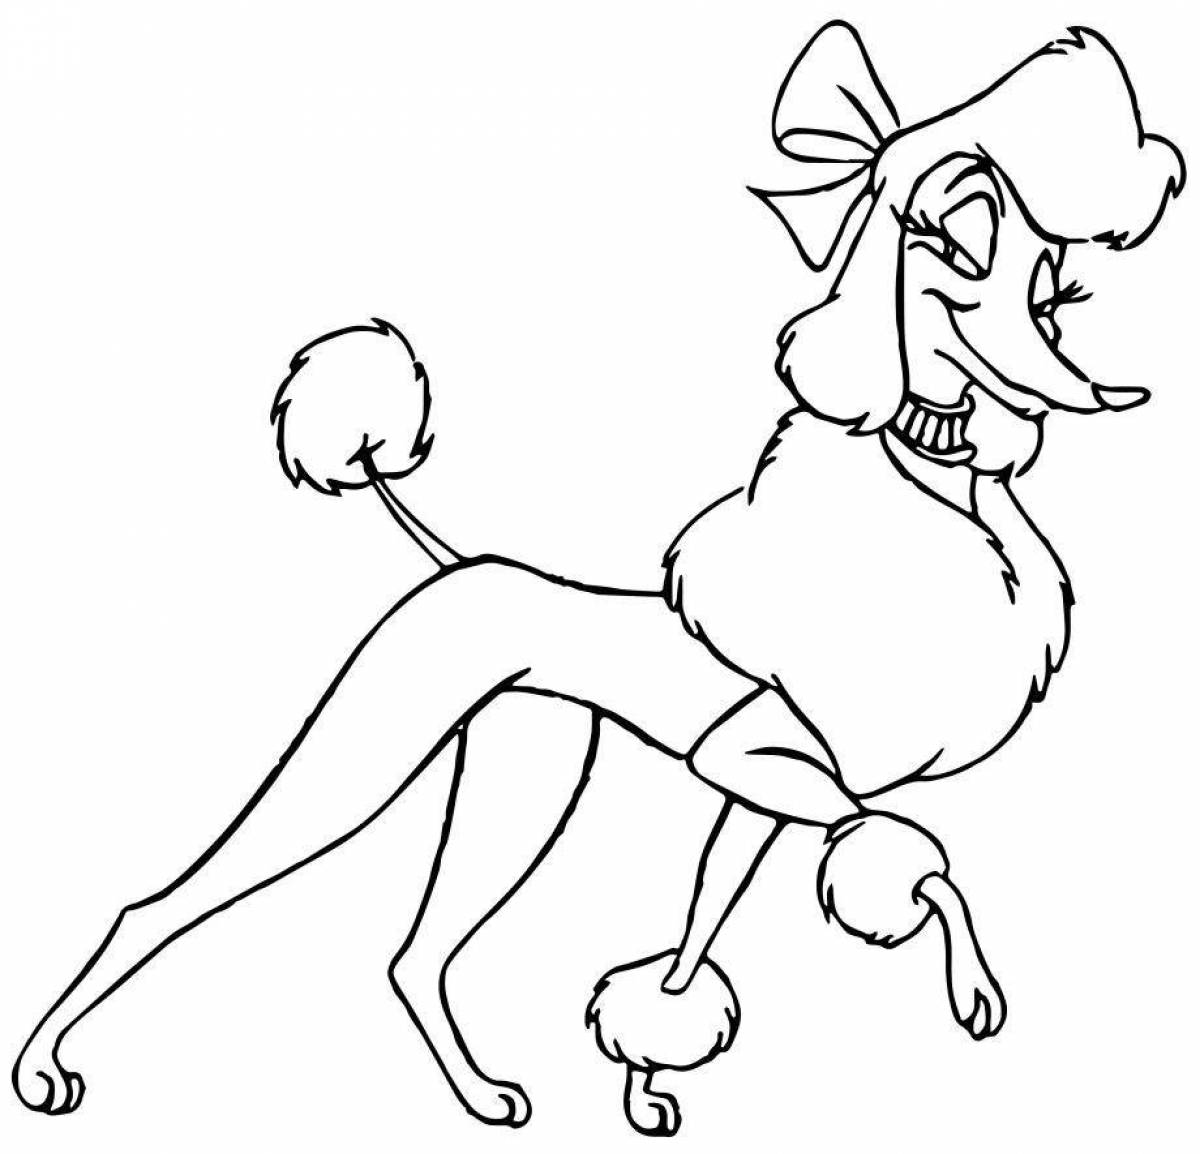 Coloring page marvelous oliver and company